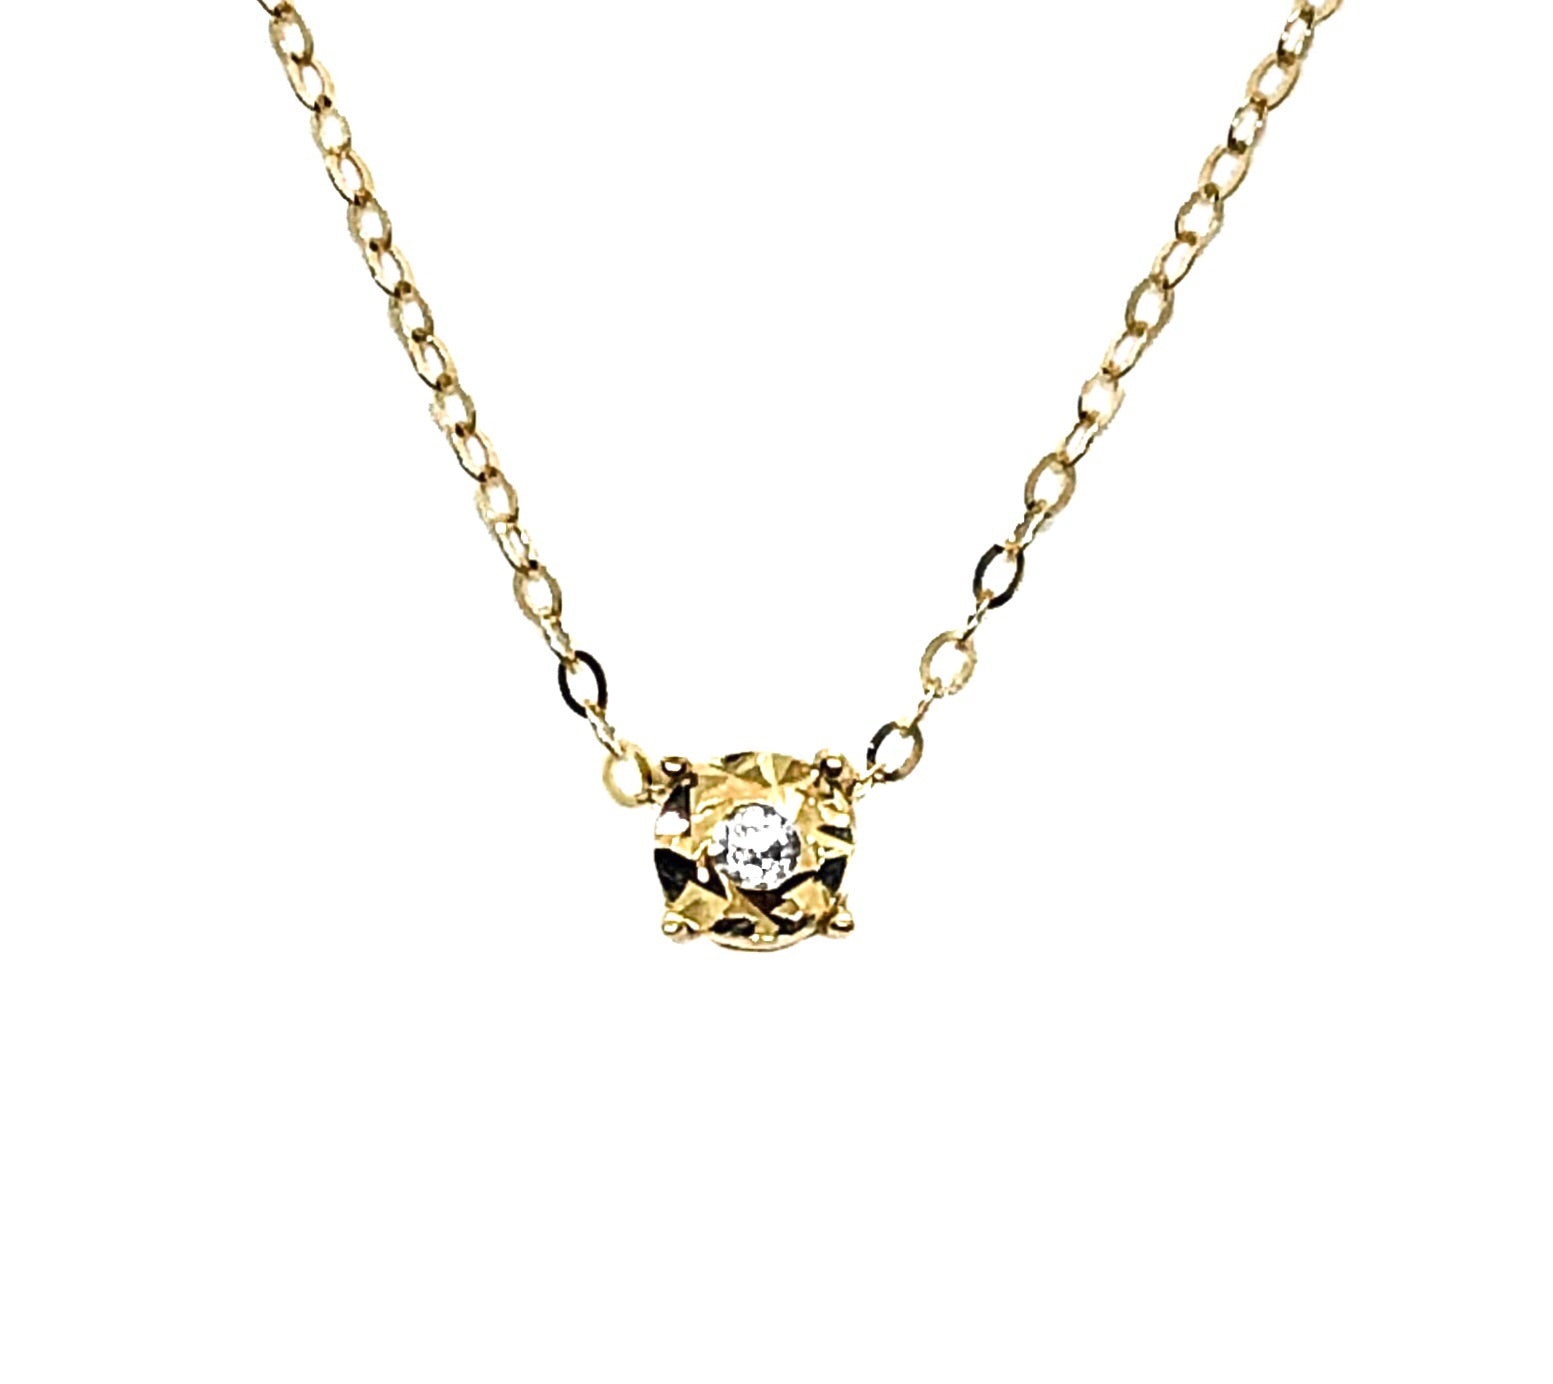 14K YELLOW GOLD TWINKLE NECKLACE